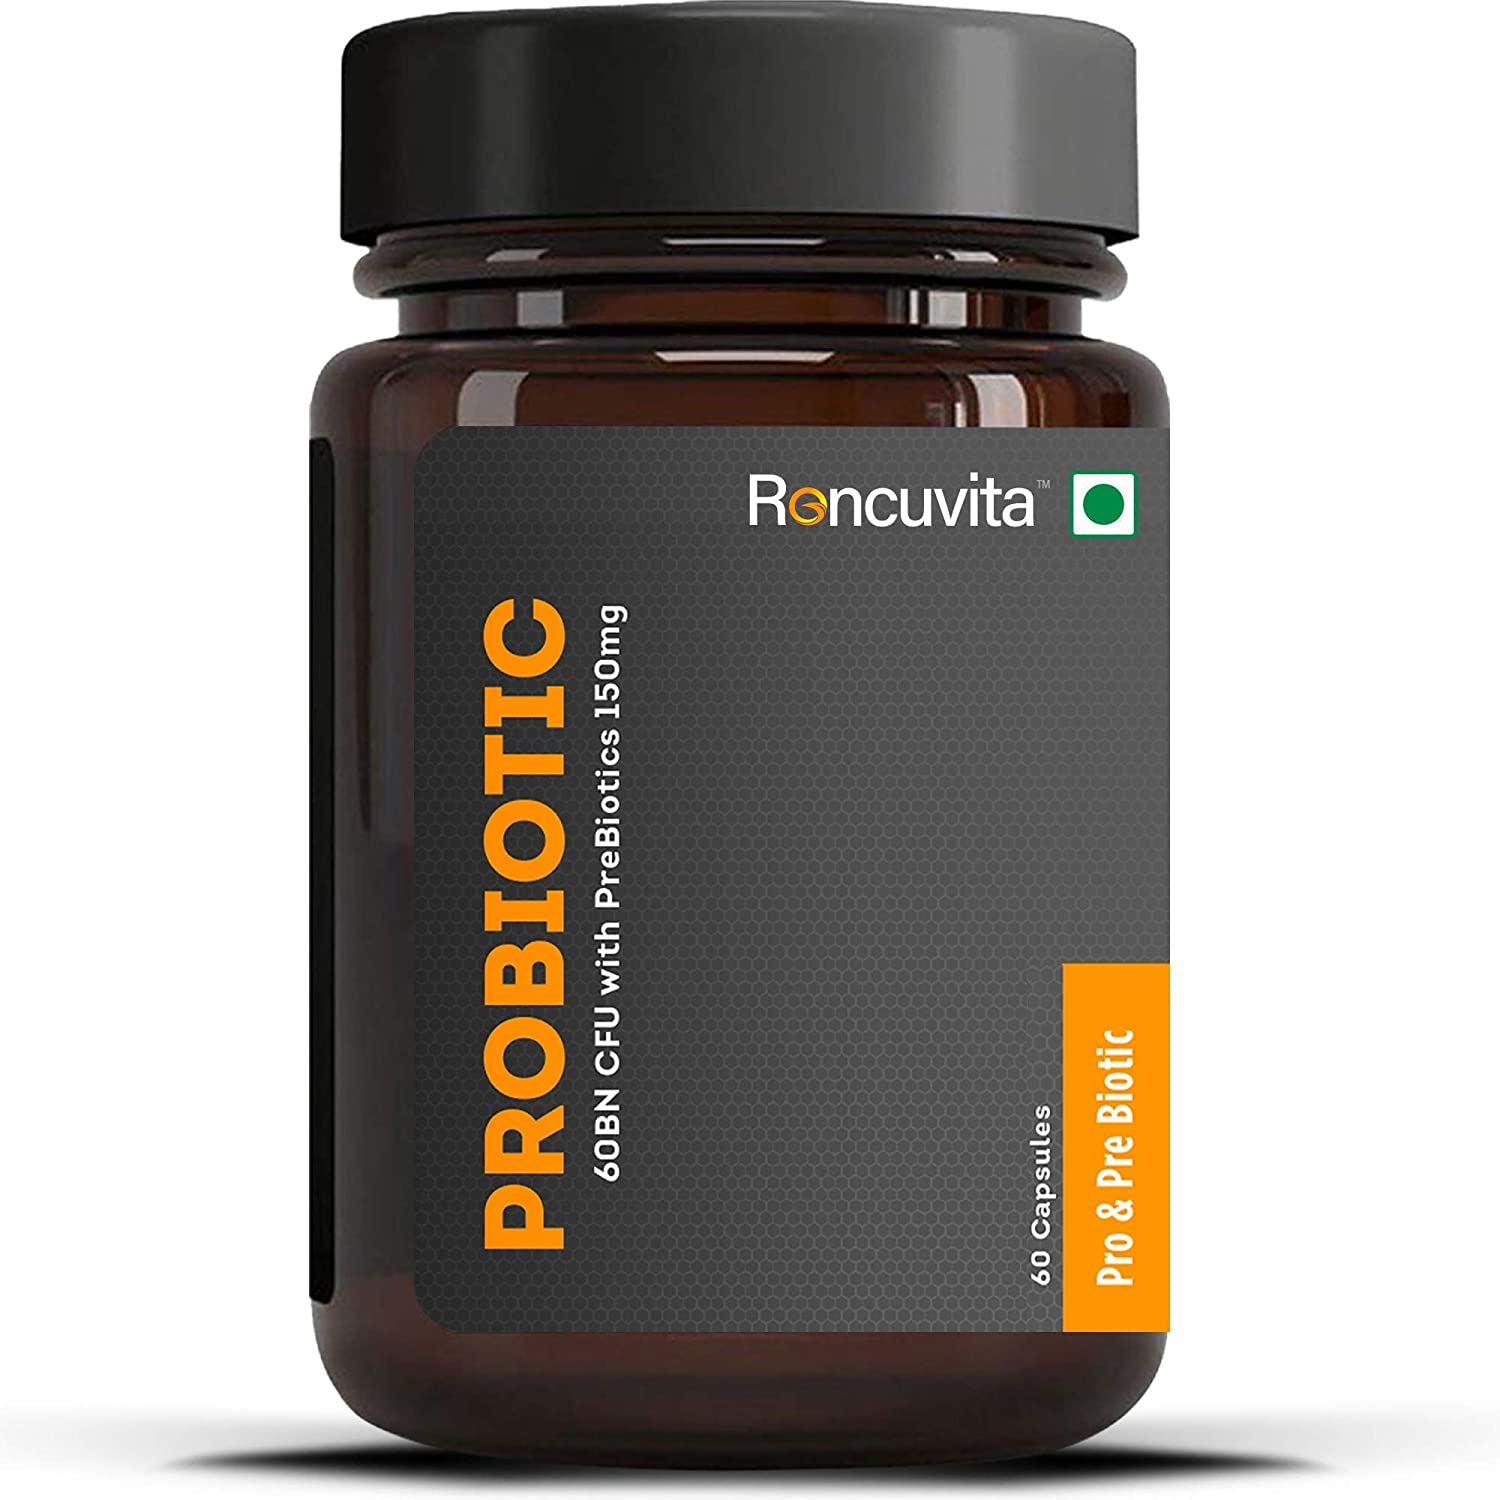 img 6130749f50633 - How Probiotic Supplement Can Help You Lose Weight?